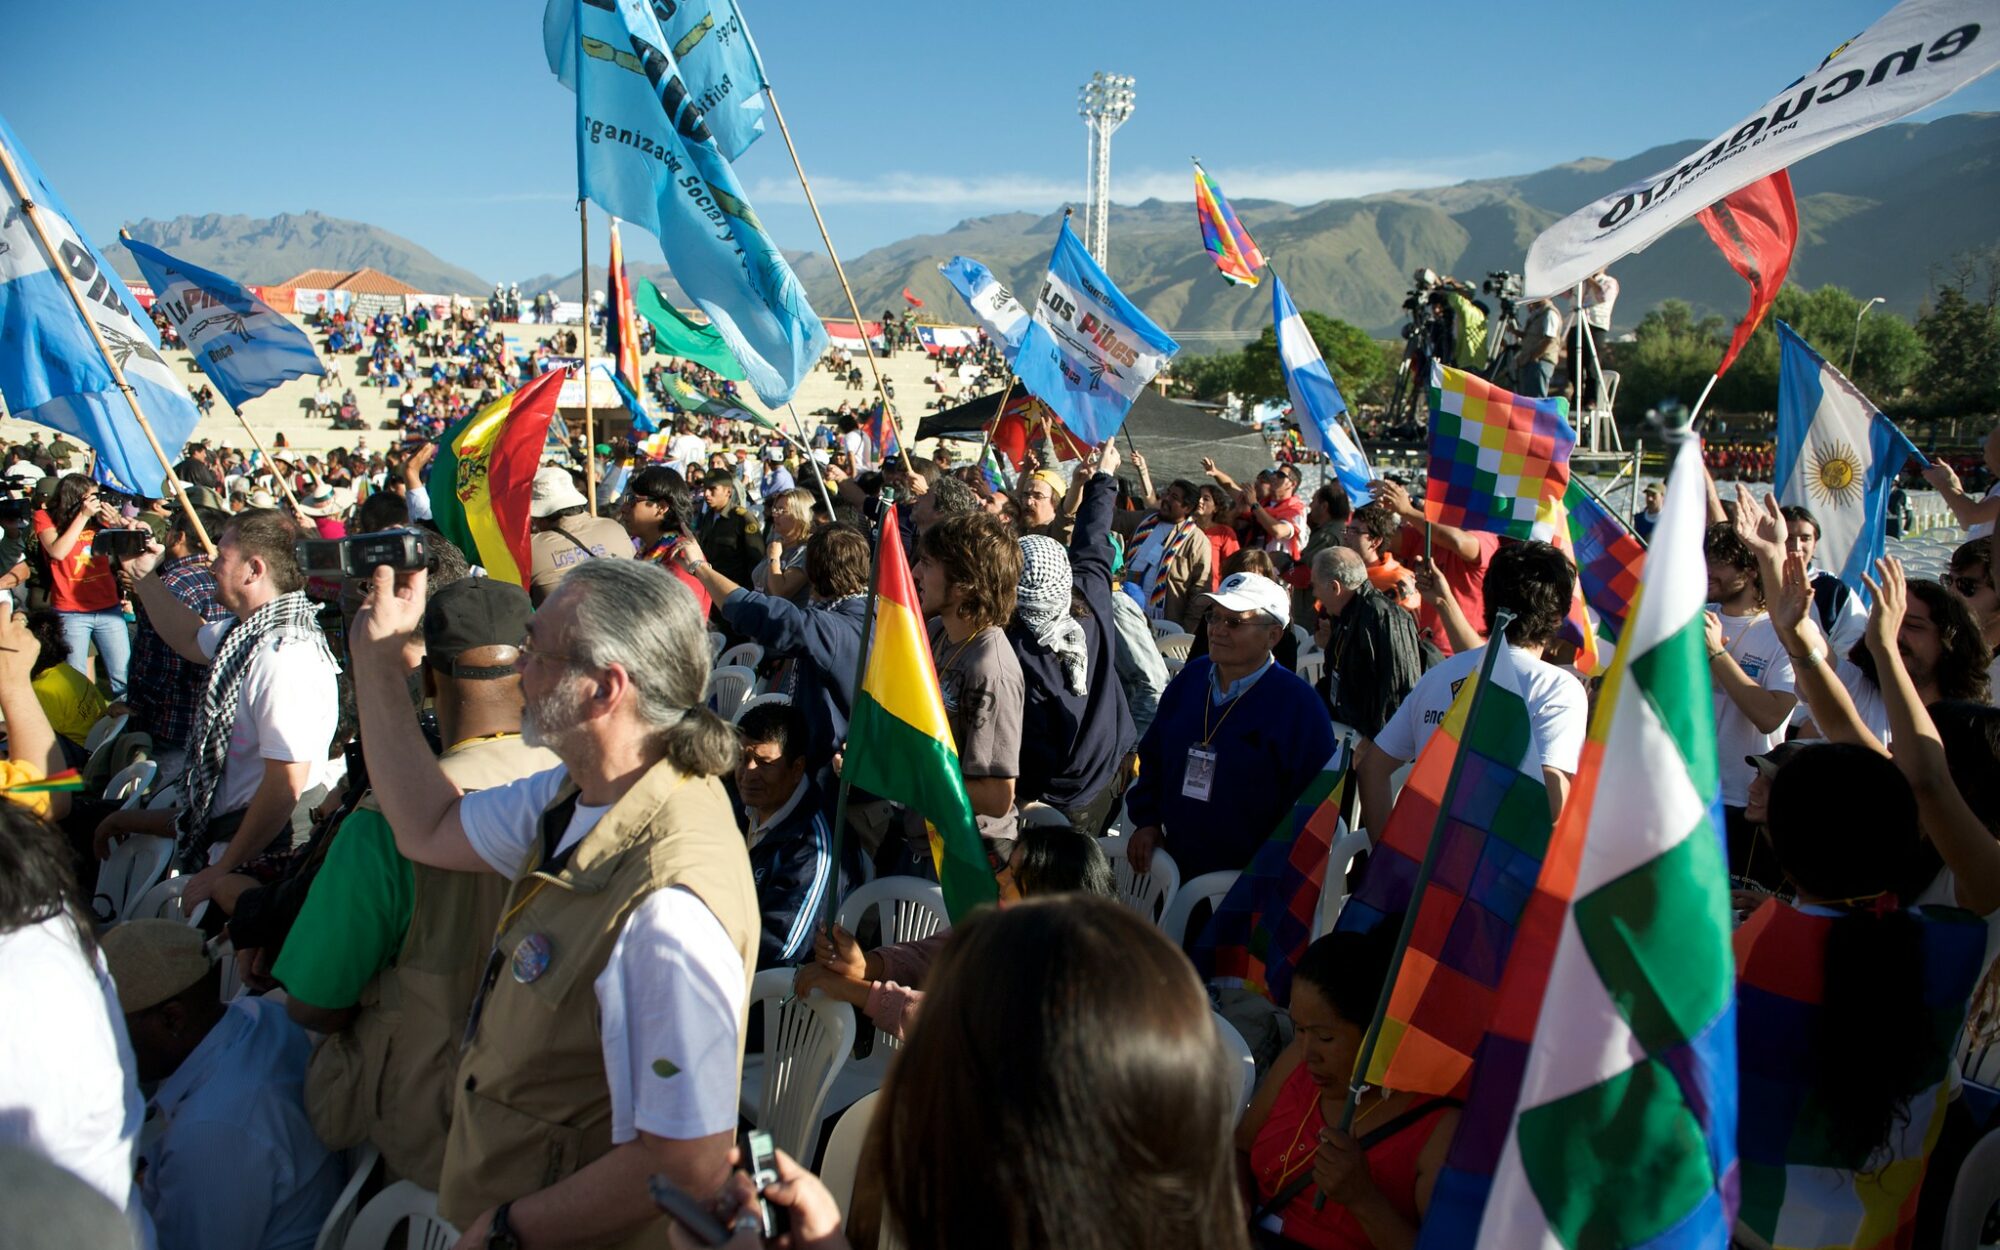 Cochabamba Bolivia World People's Conference on Climate Change and the Rights of Mother Earth. People are marching and holding various coloured flags.